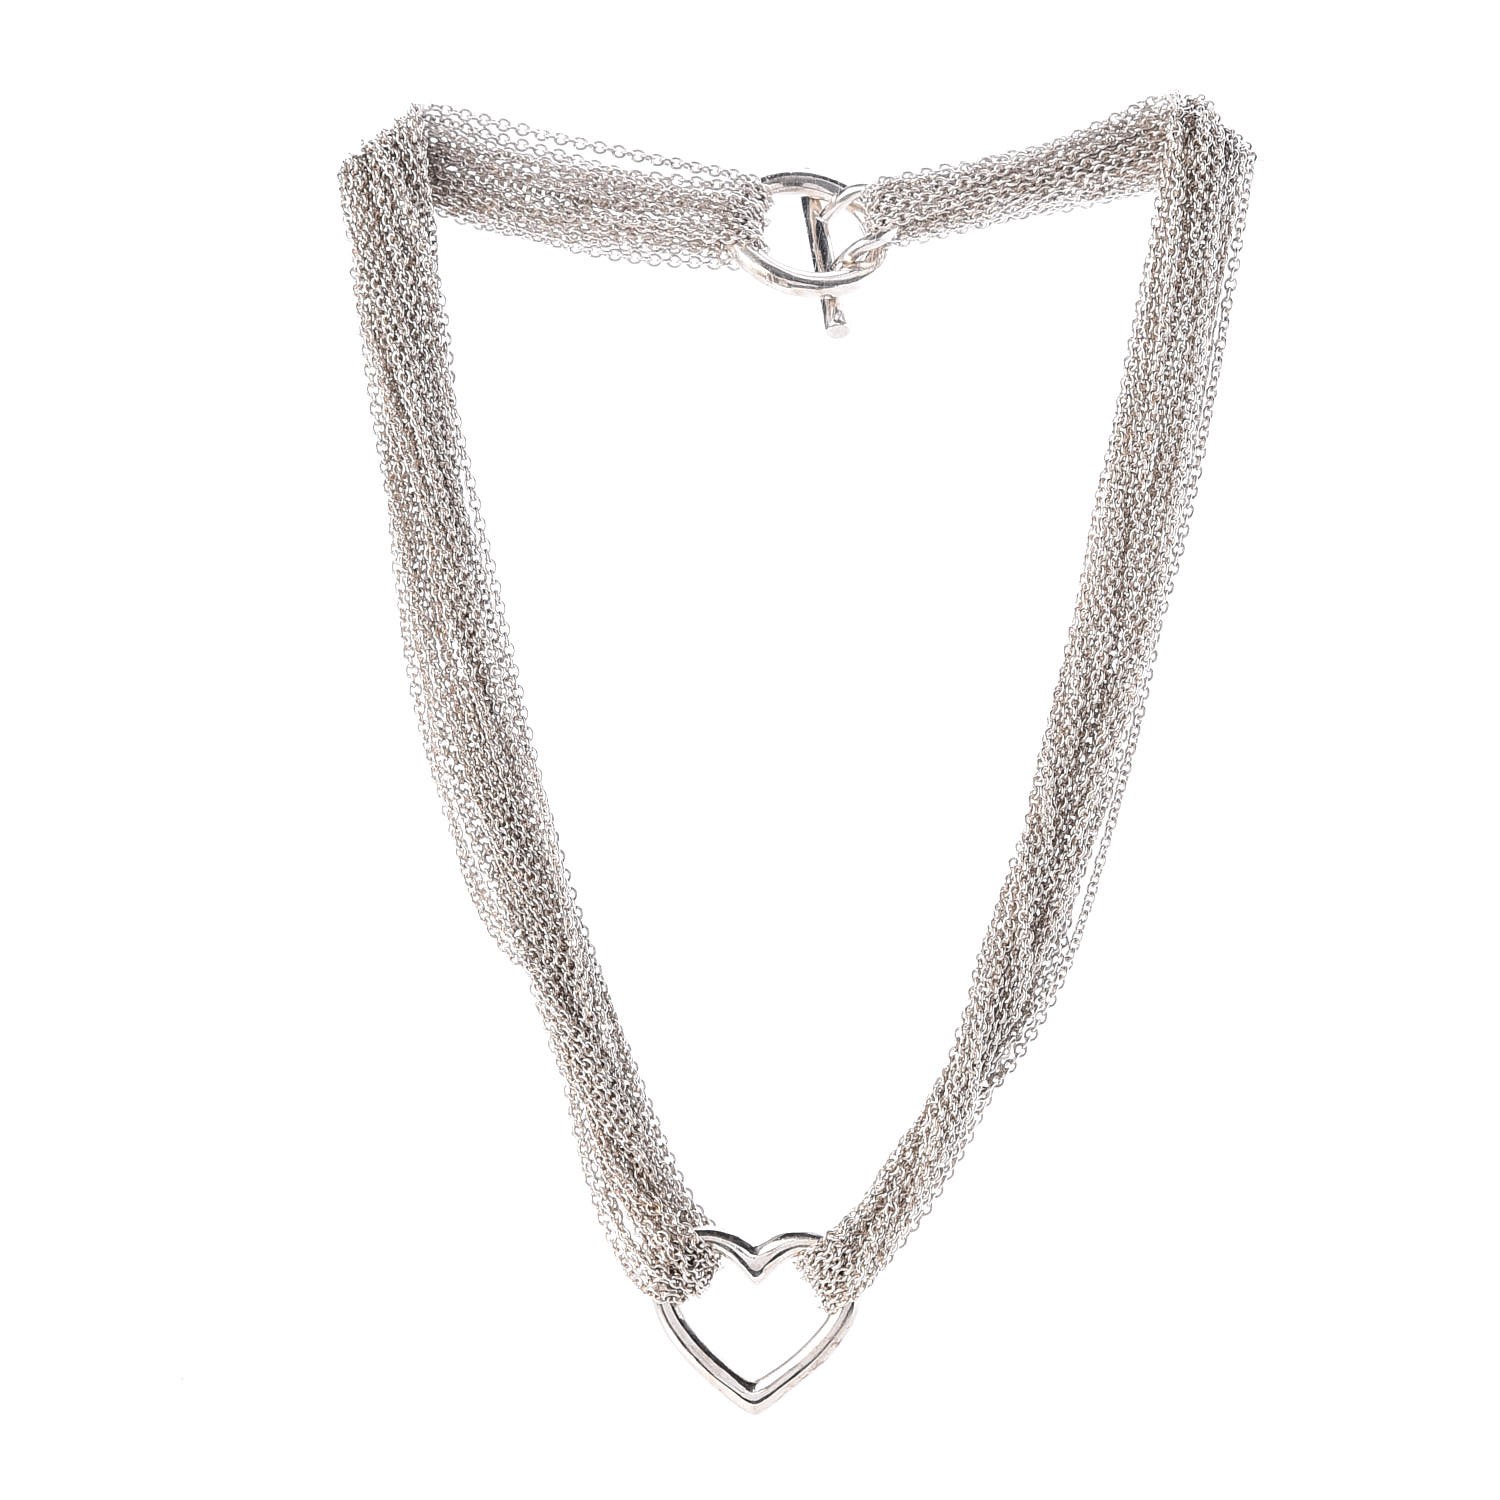 TIFFANY Sterling Silver Heart Mesh Toggle Necklace 320350 | FASHIONPHILE